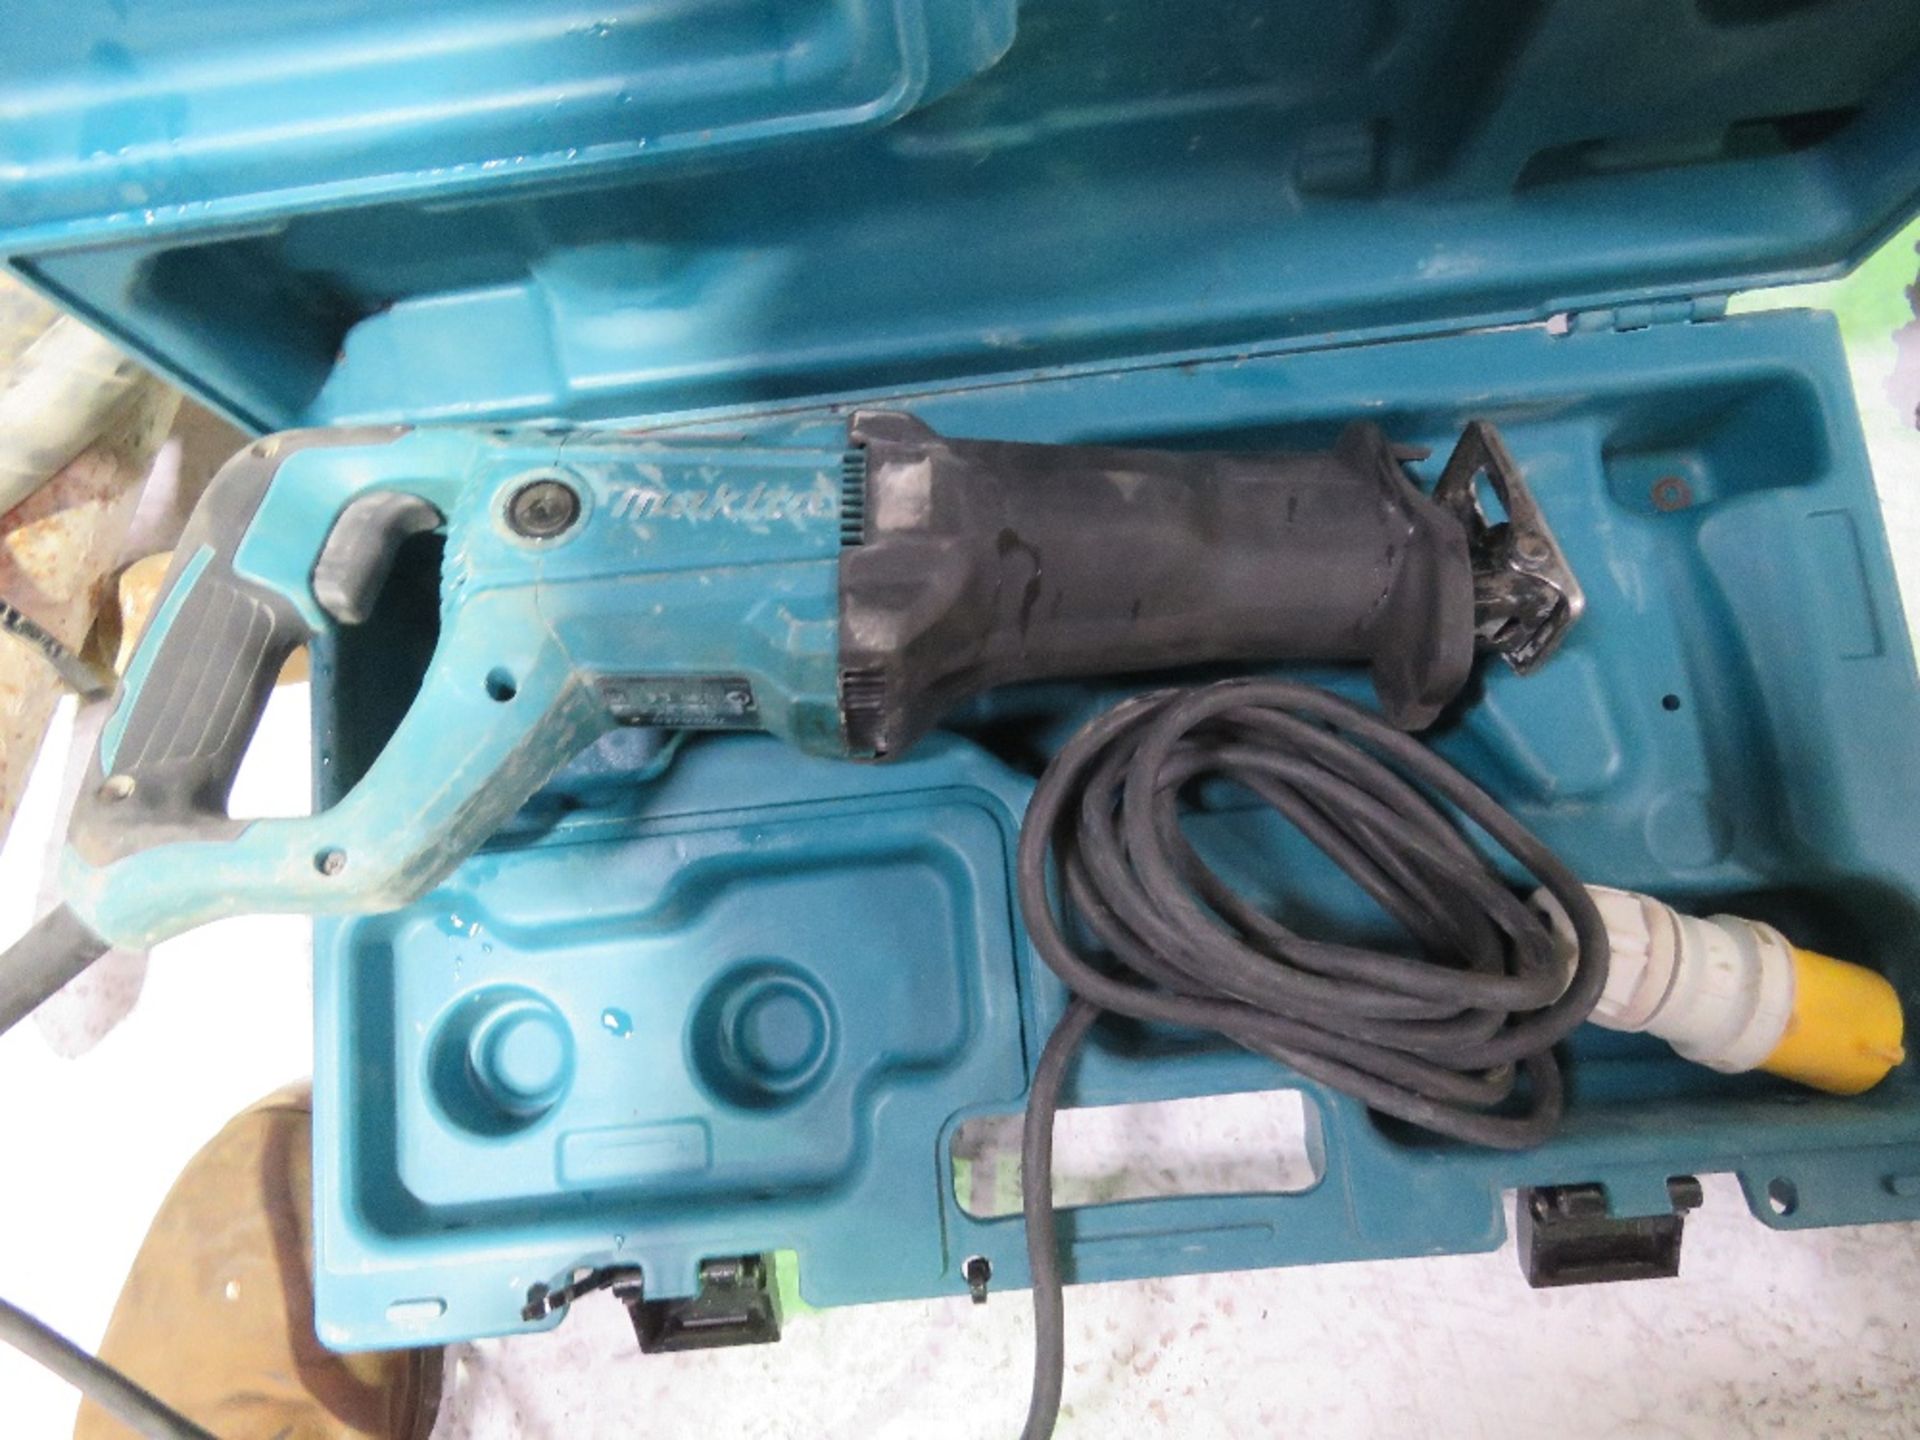 2 X MAKITA 110VOLT POWERED RECIPROCATING SAWS IN CASES THX13945,16388 - Image 4 of 4